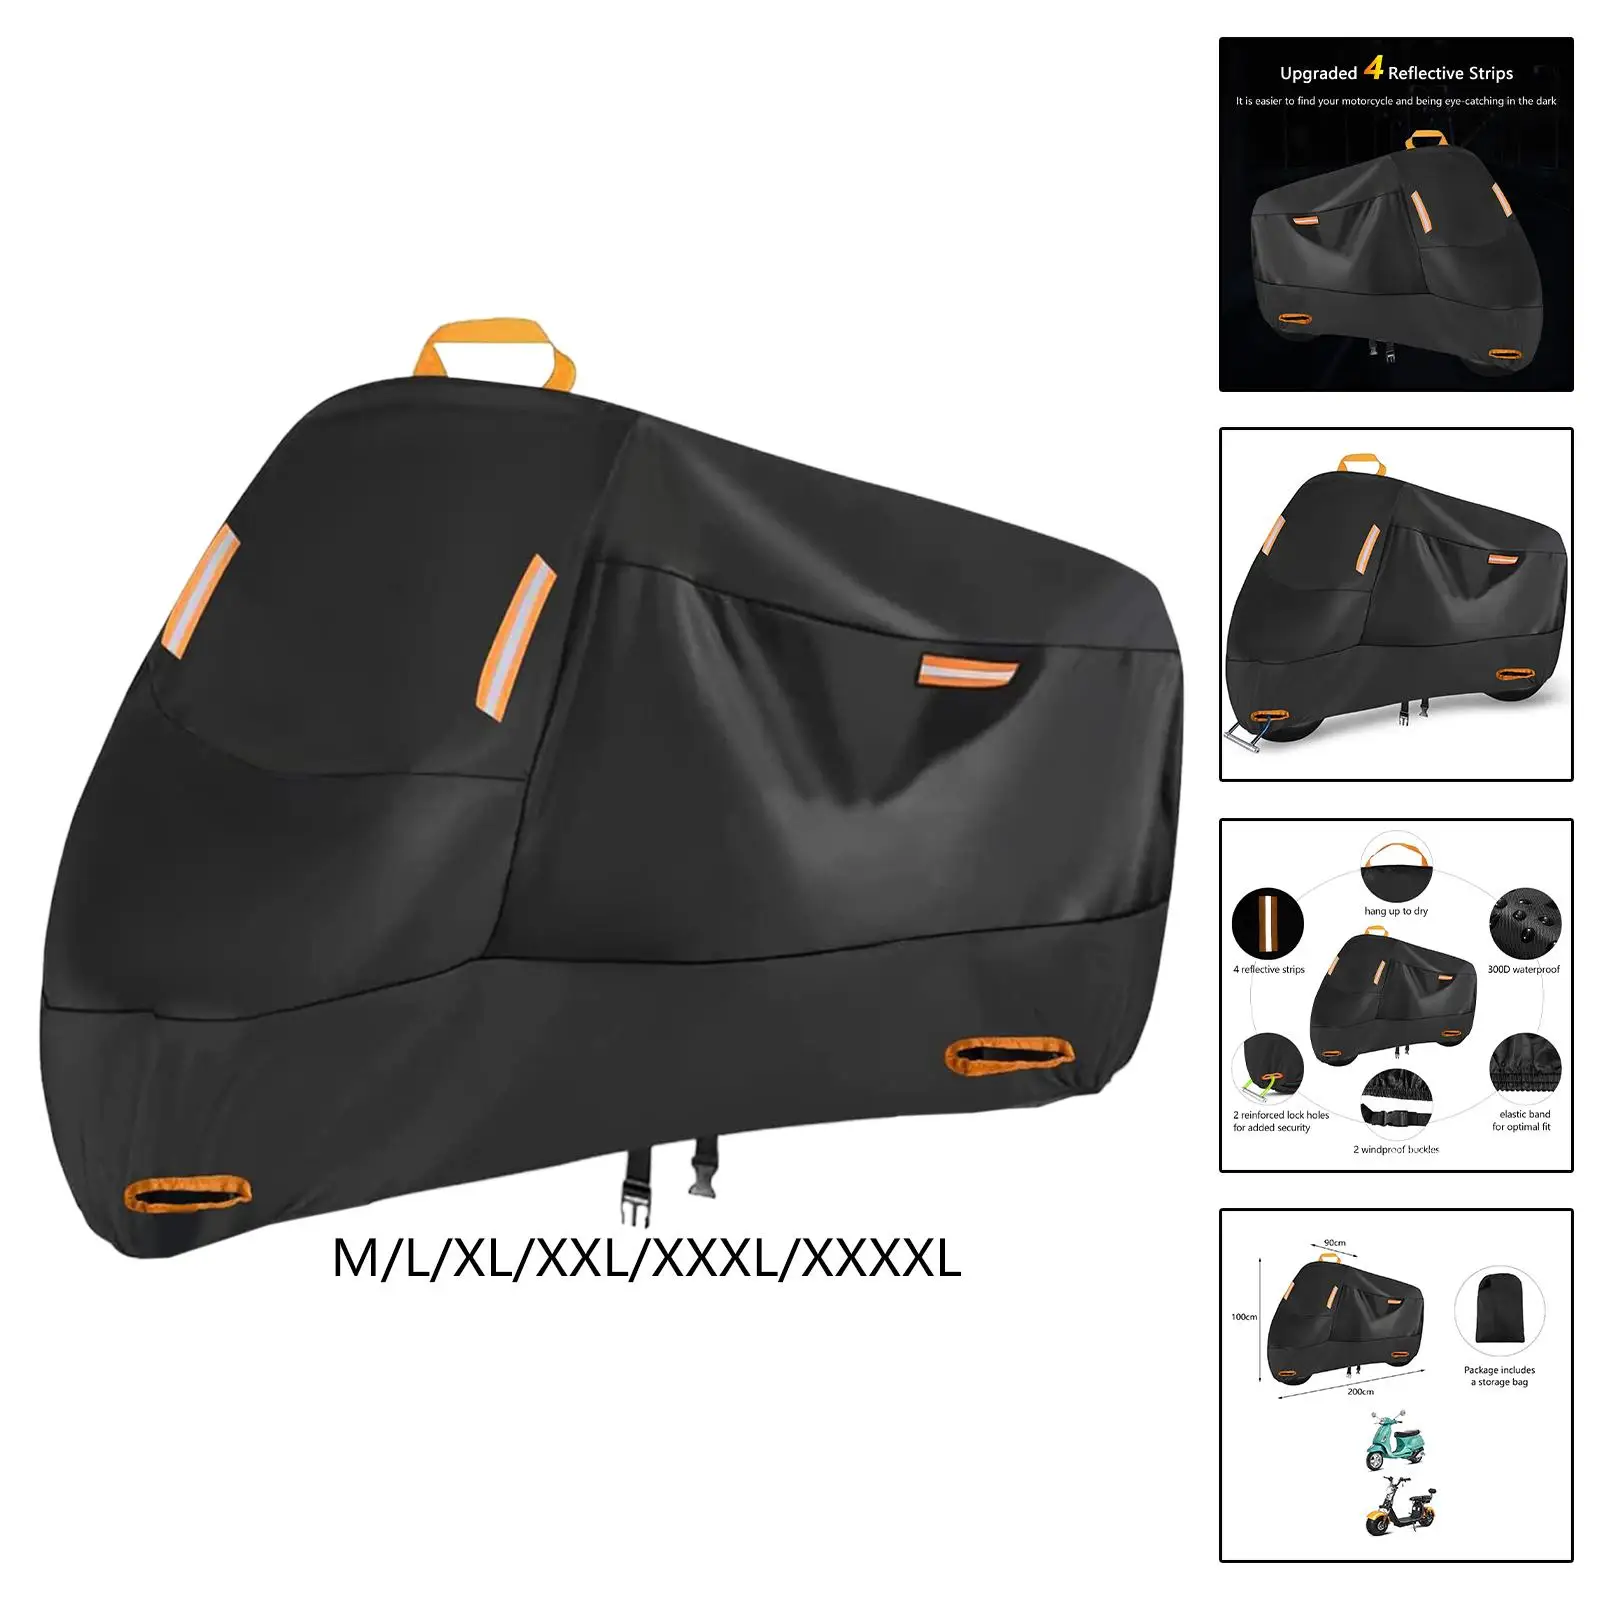 Motorcycle Cover Dustproof Scooter Cover for Motorbike Bike All Season